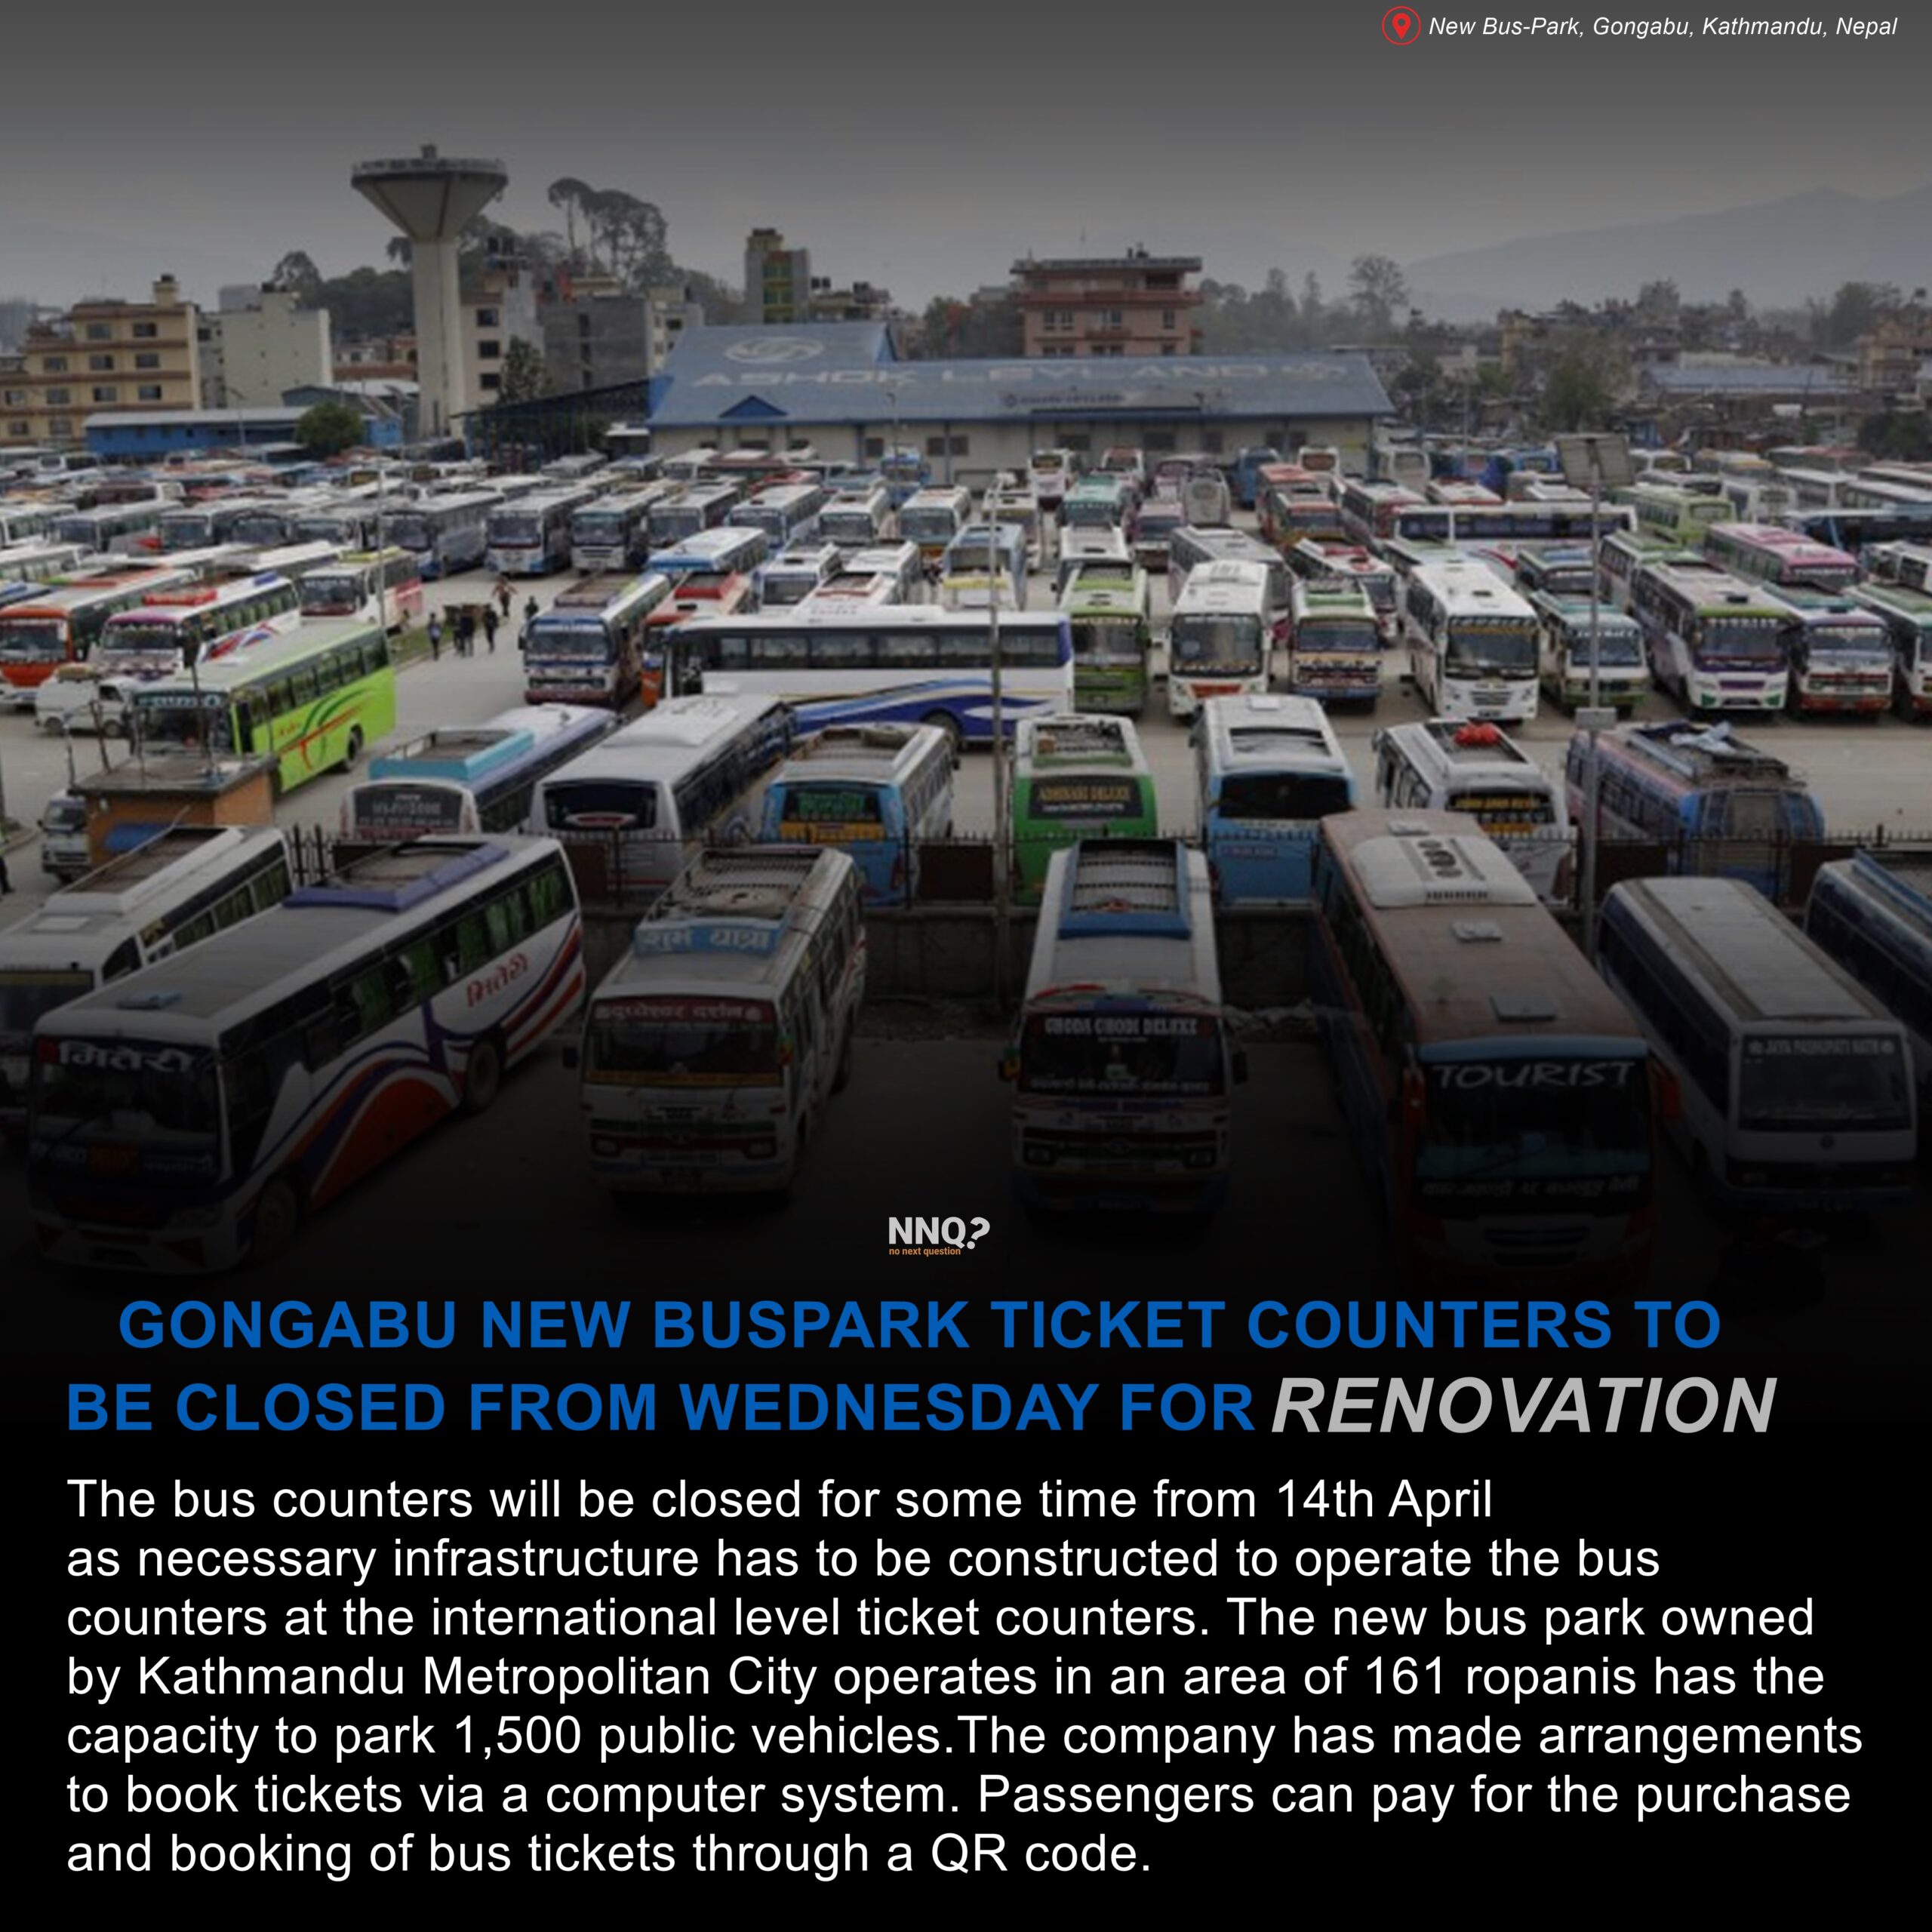 Gongabu New Bus Park to be closed from Wednesday for sometime.